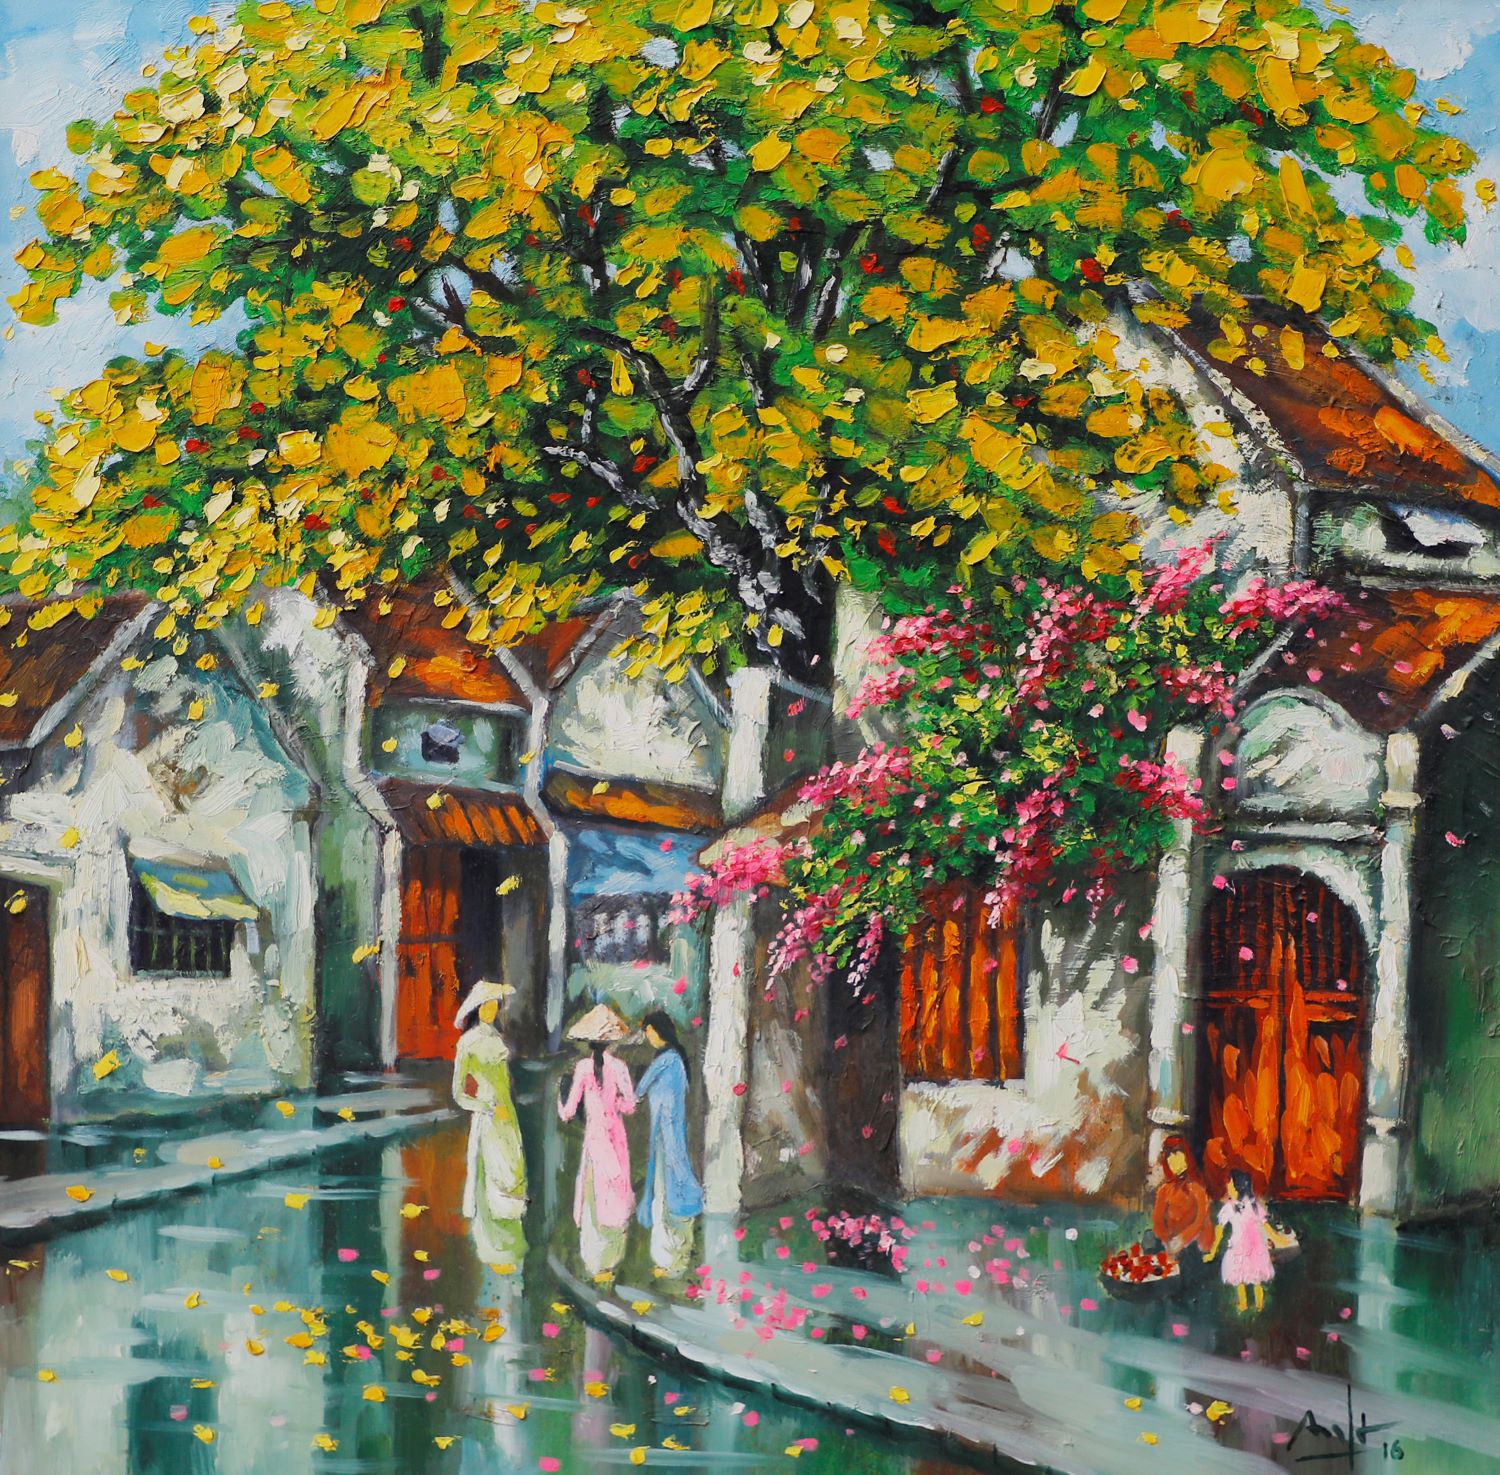 Old Street after the Rain I - Vietnamese Oil Painting by Artist Dau Quang Anh